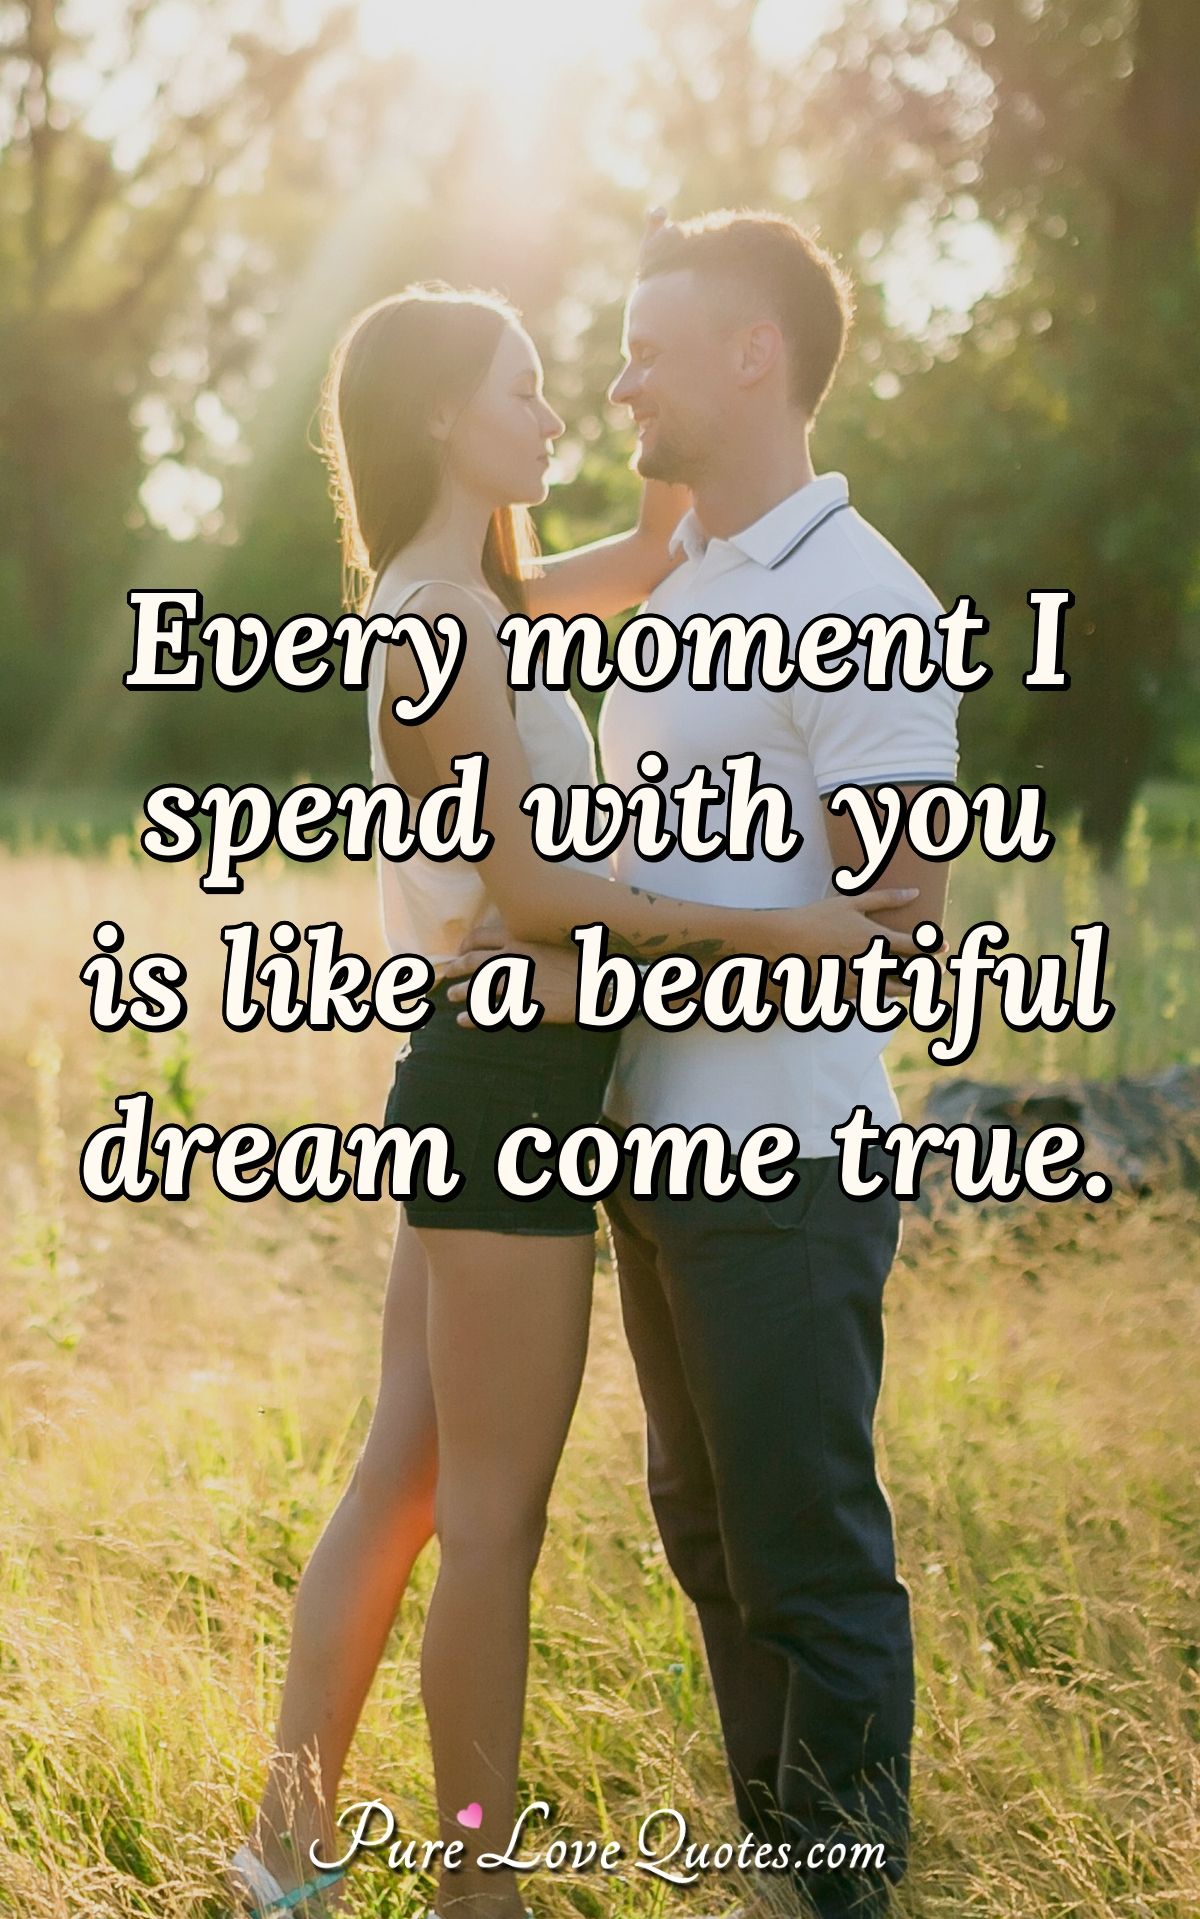 Every moment I spend with you is like a beautiful dream come true. - Anonymous